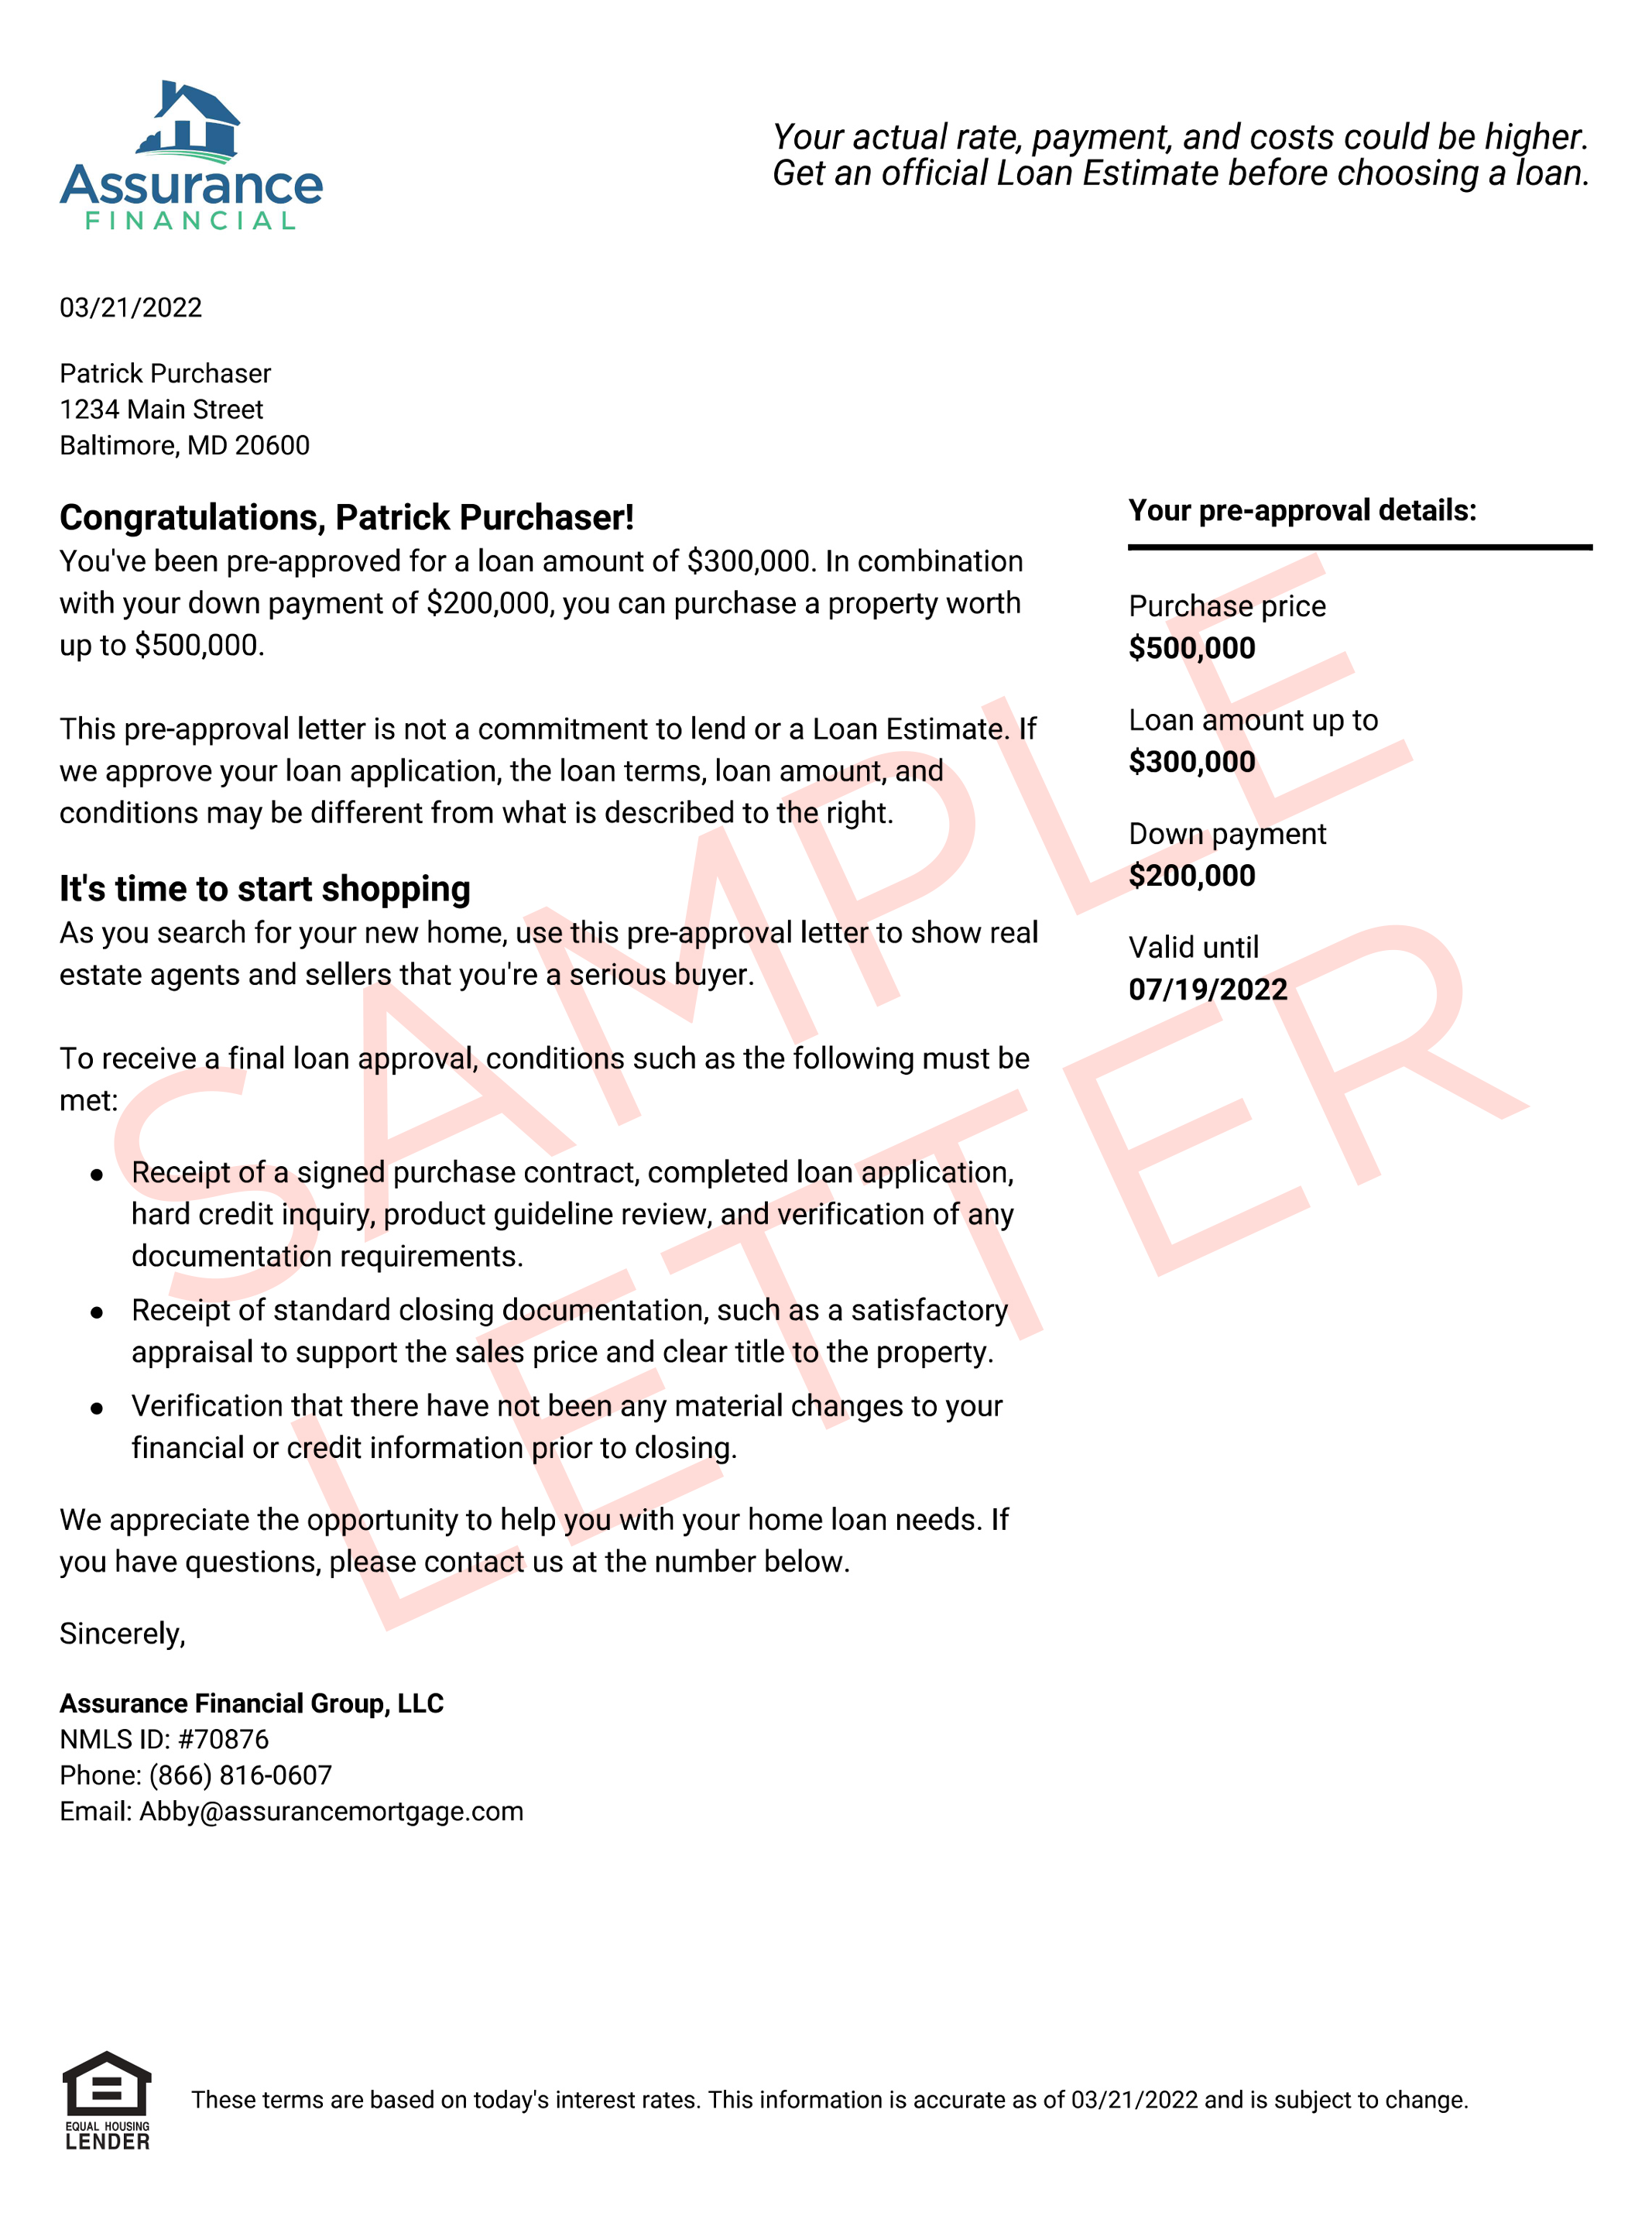 pre-approval letter with watermark